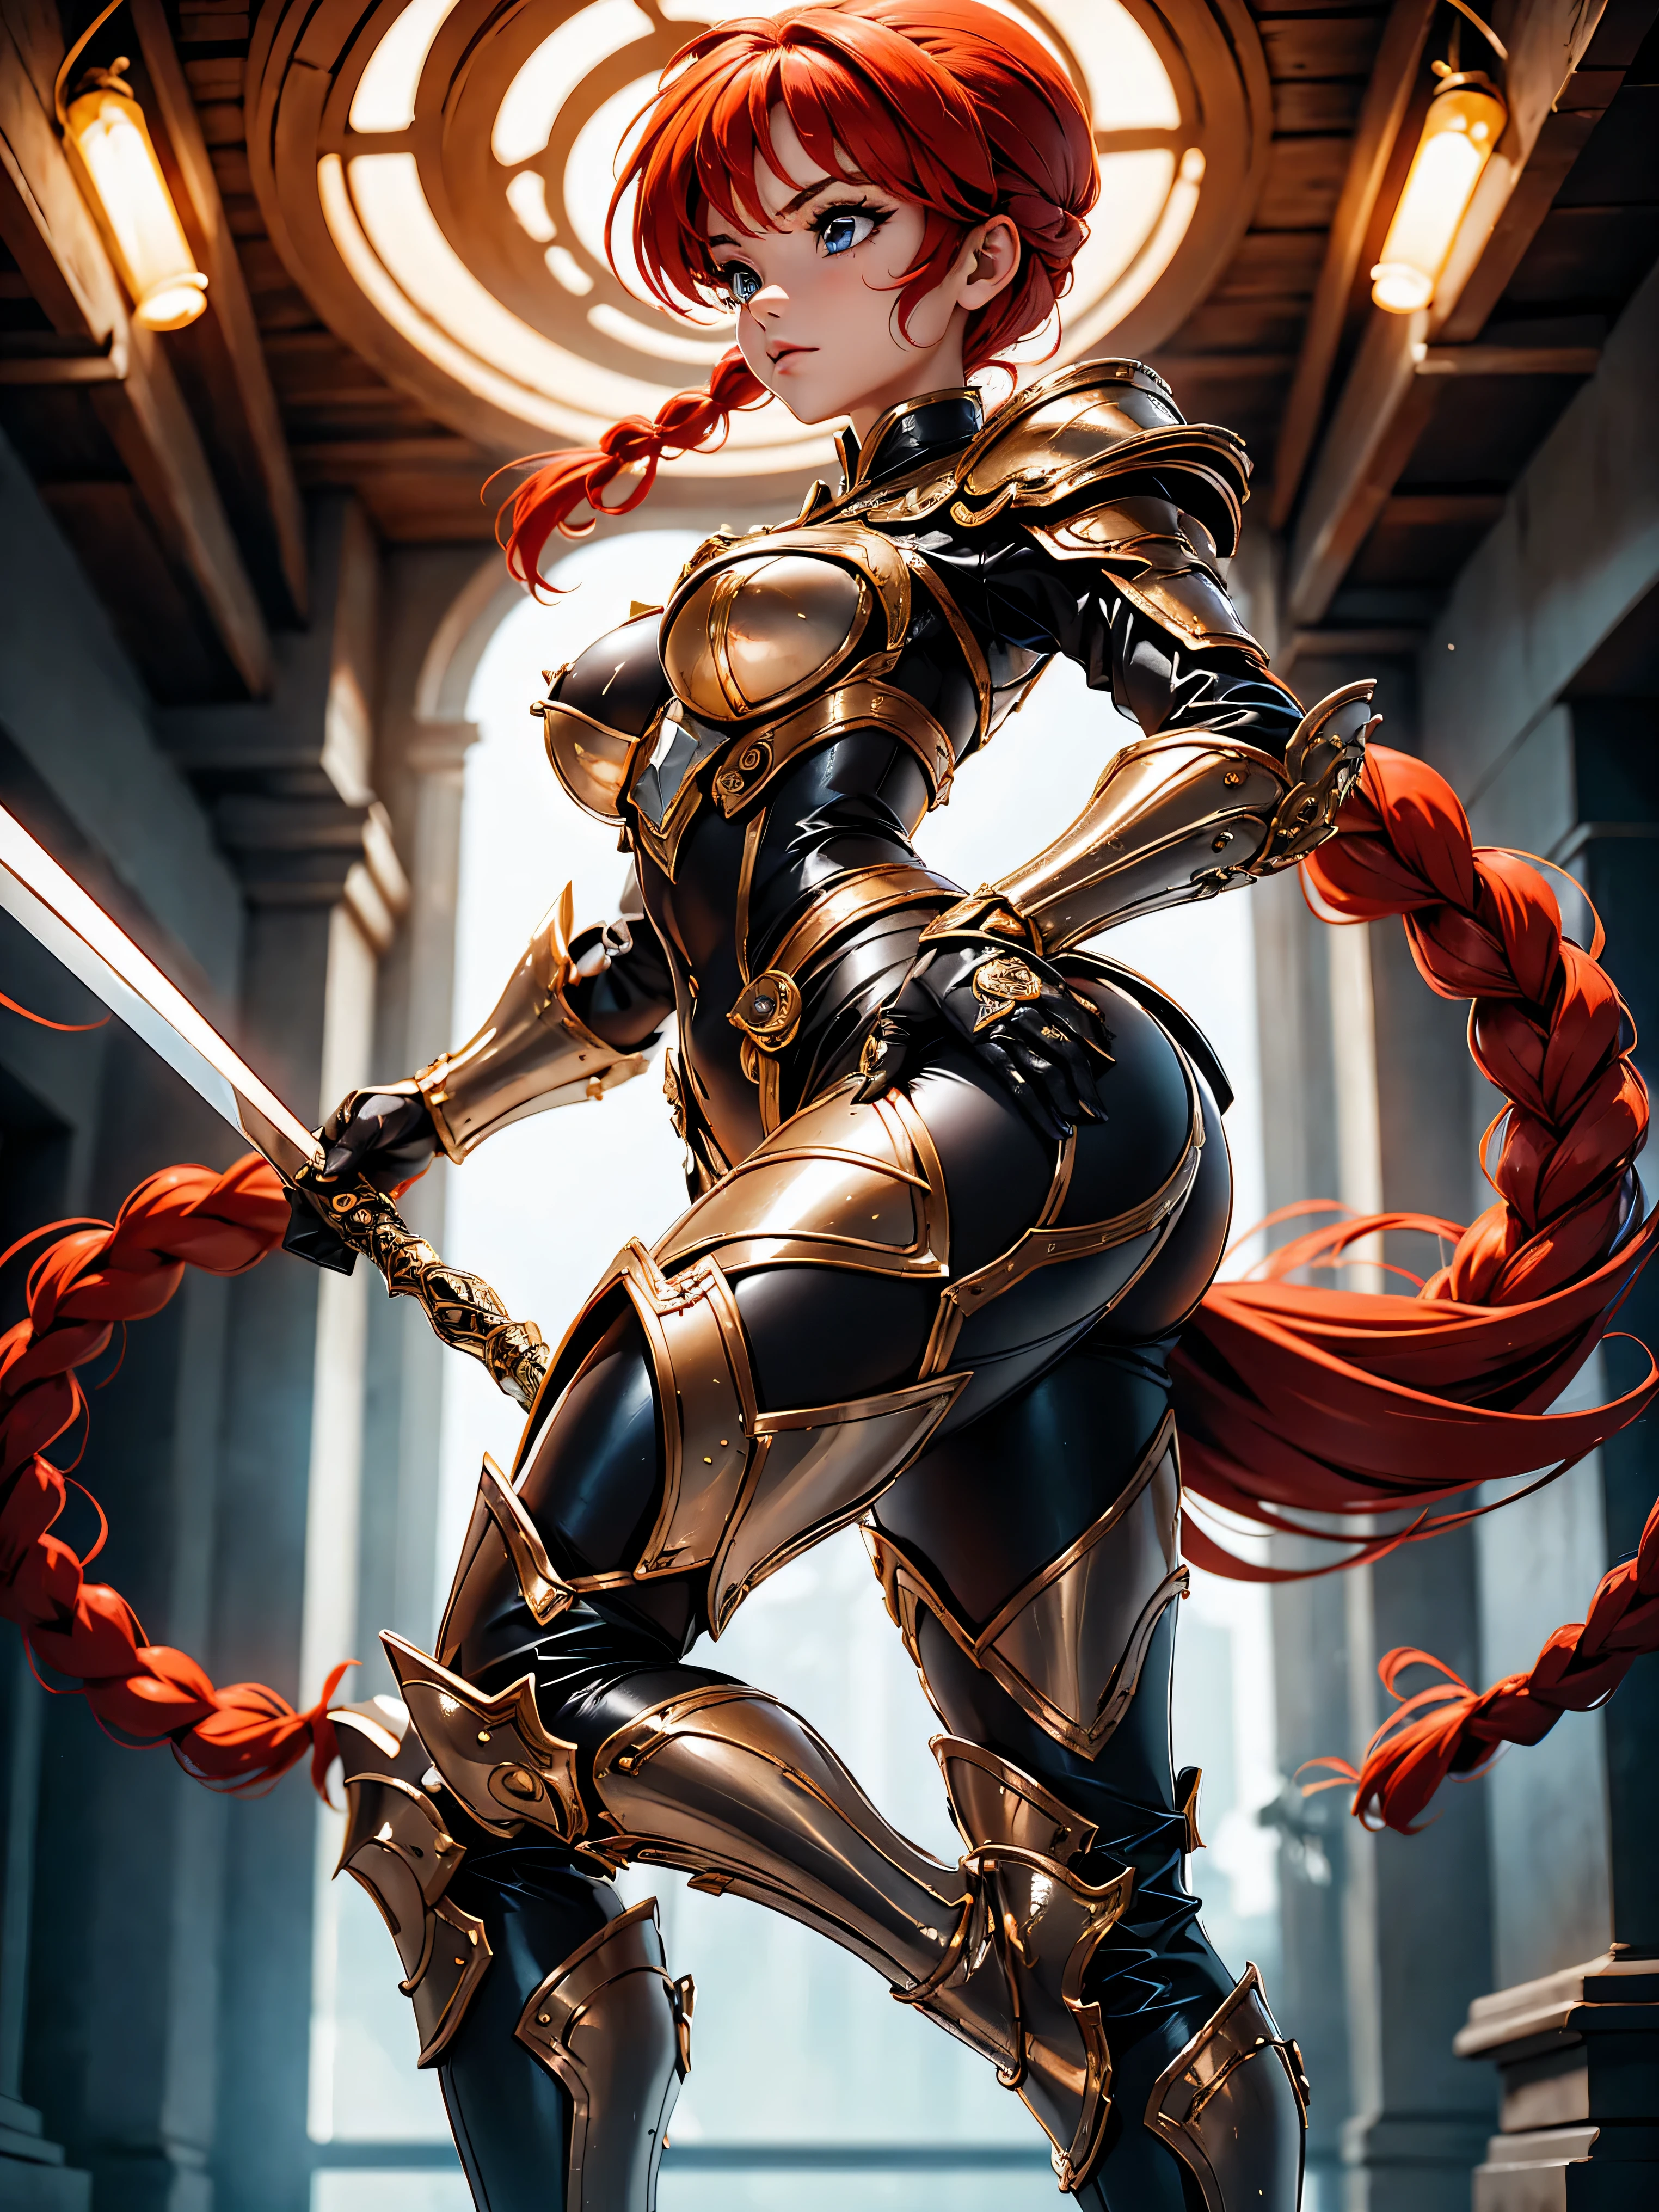 Redhead warrior anime girl, com fox ears, with red armor,  red armored, 15year old, Body cute, breasts big, Combat posture, holding sword, sexy girl, red hair with braid, side hair highlights, locks of hair on the side of the face, beautiful lighting, softshadows, blue colored eyes, pretty legs, short hair with braid, anime styling, ranma chan, Autora Rumiko Takahashi, Based on a work by Rumiko Takahashi, Anime Ranma 1/ 2, sexy warrior, robust hip, fully body, fully body, Bust Big, garota jovem com fox ears, beautiful and beautiful body, boots on feet, garota 15year old jovem baixa estatura, wearing gothic armor, anime girl, anime styling, feet with black boots, front view angle, plein-air, red hair braid, fox ears, upright posture, body in straight posture, eyes large, red armor